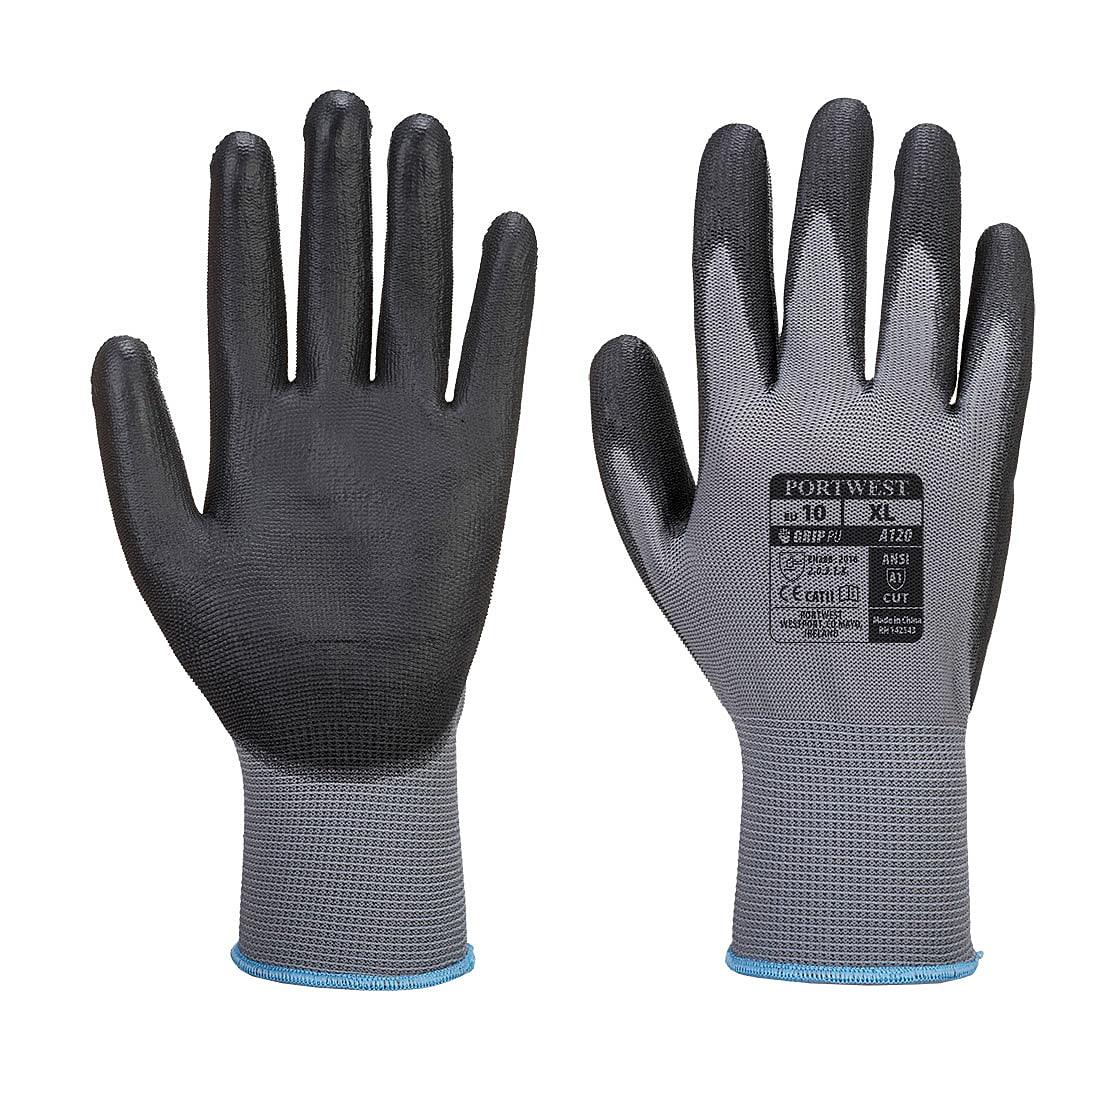 Portwest PU Palm Gloves in Grey / Black (Product Code: A120)